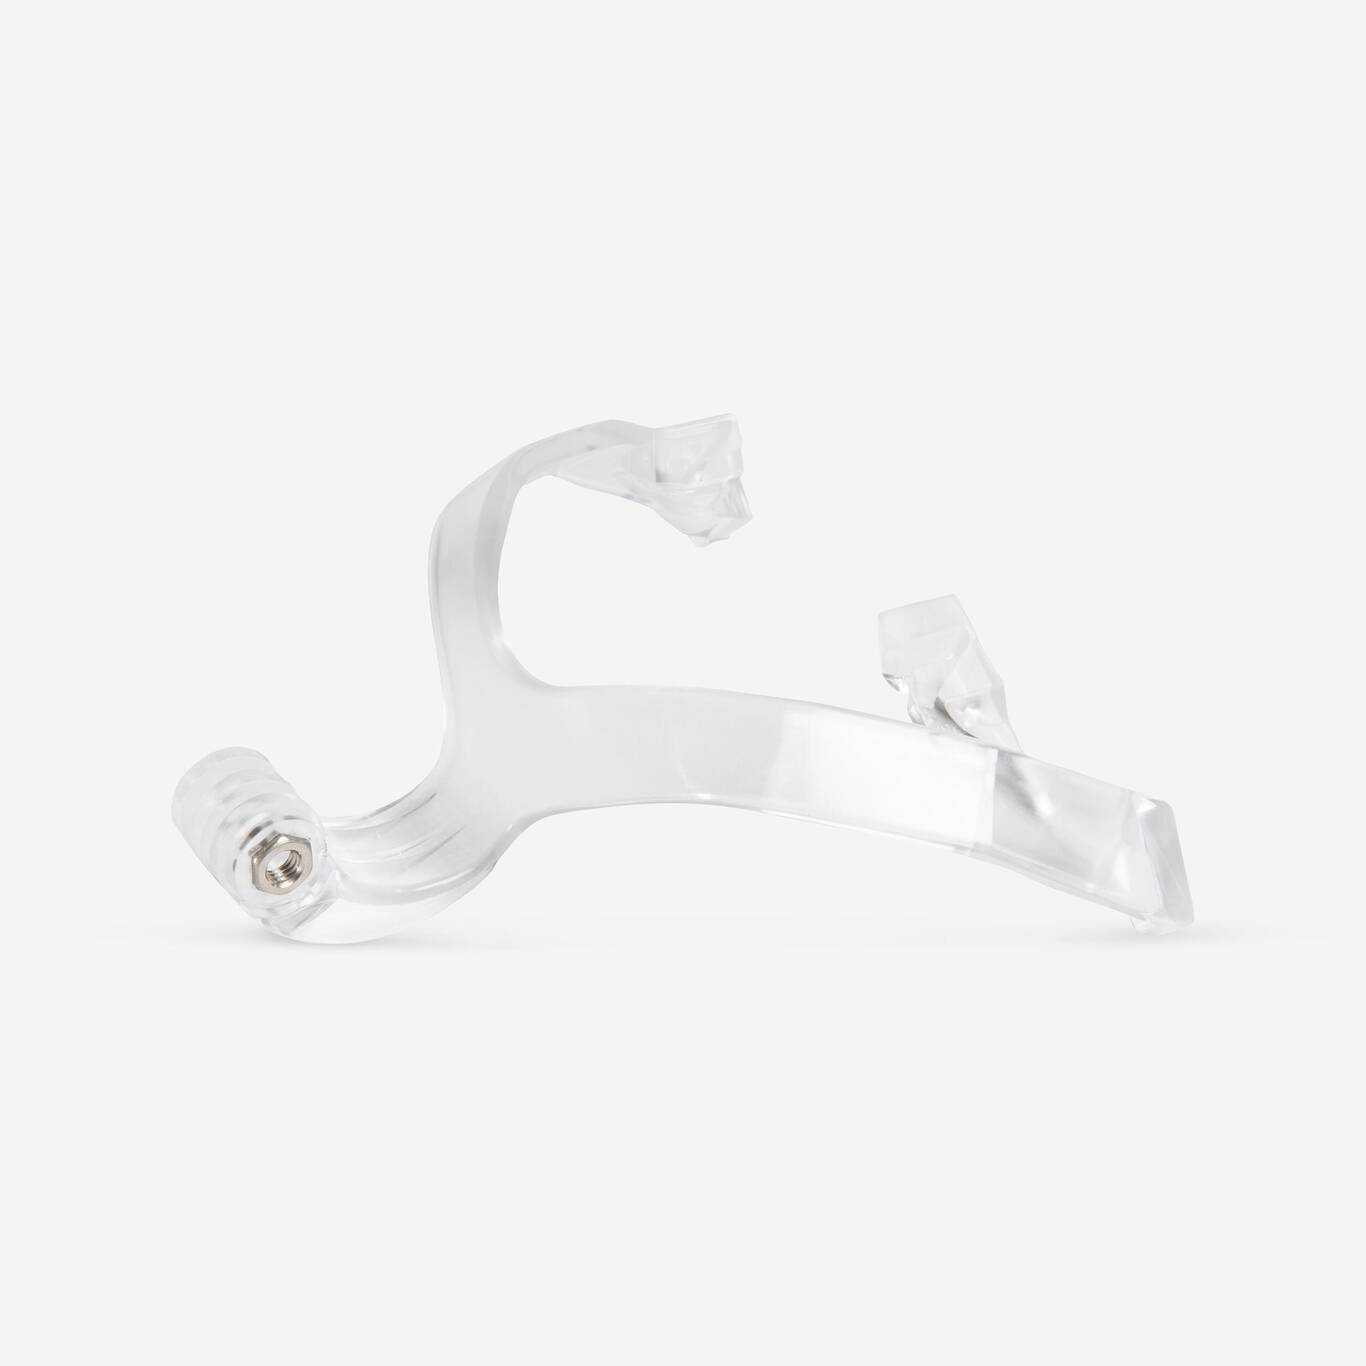 Camera mount for the Easybreath Snorkelling mask